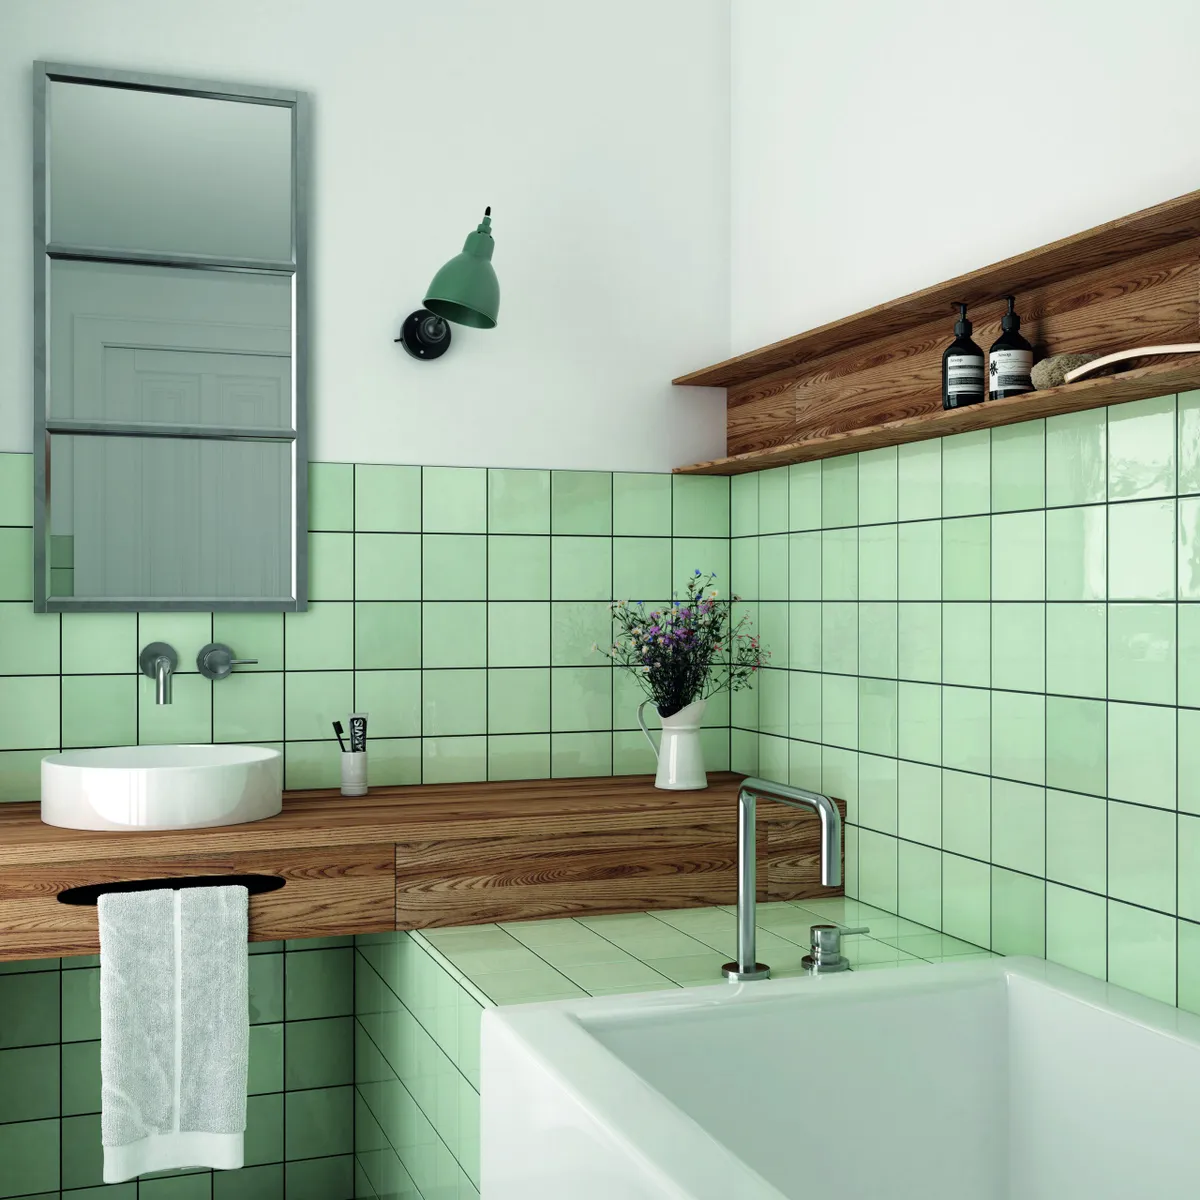 A dark grout allows these pale green tiles to take centre stage. Village Mint wall tiles, £29.99 per sq m, Tile Mountain